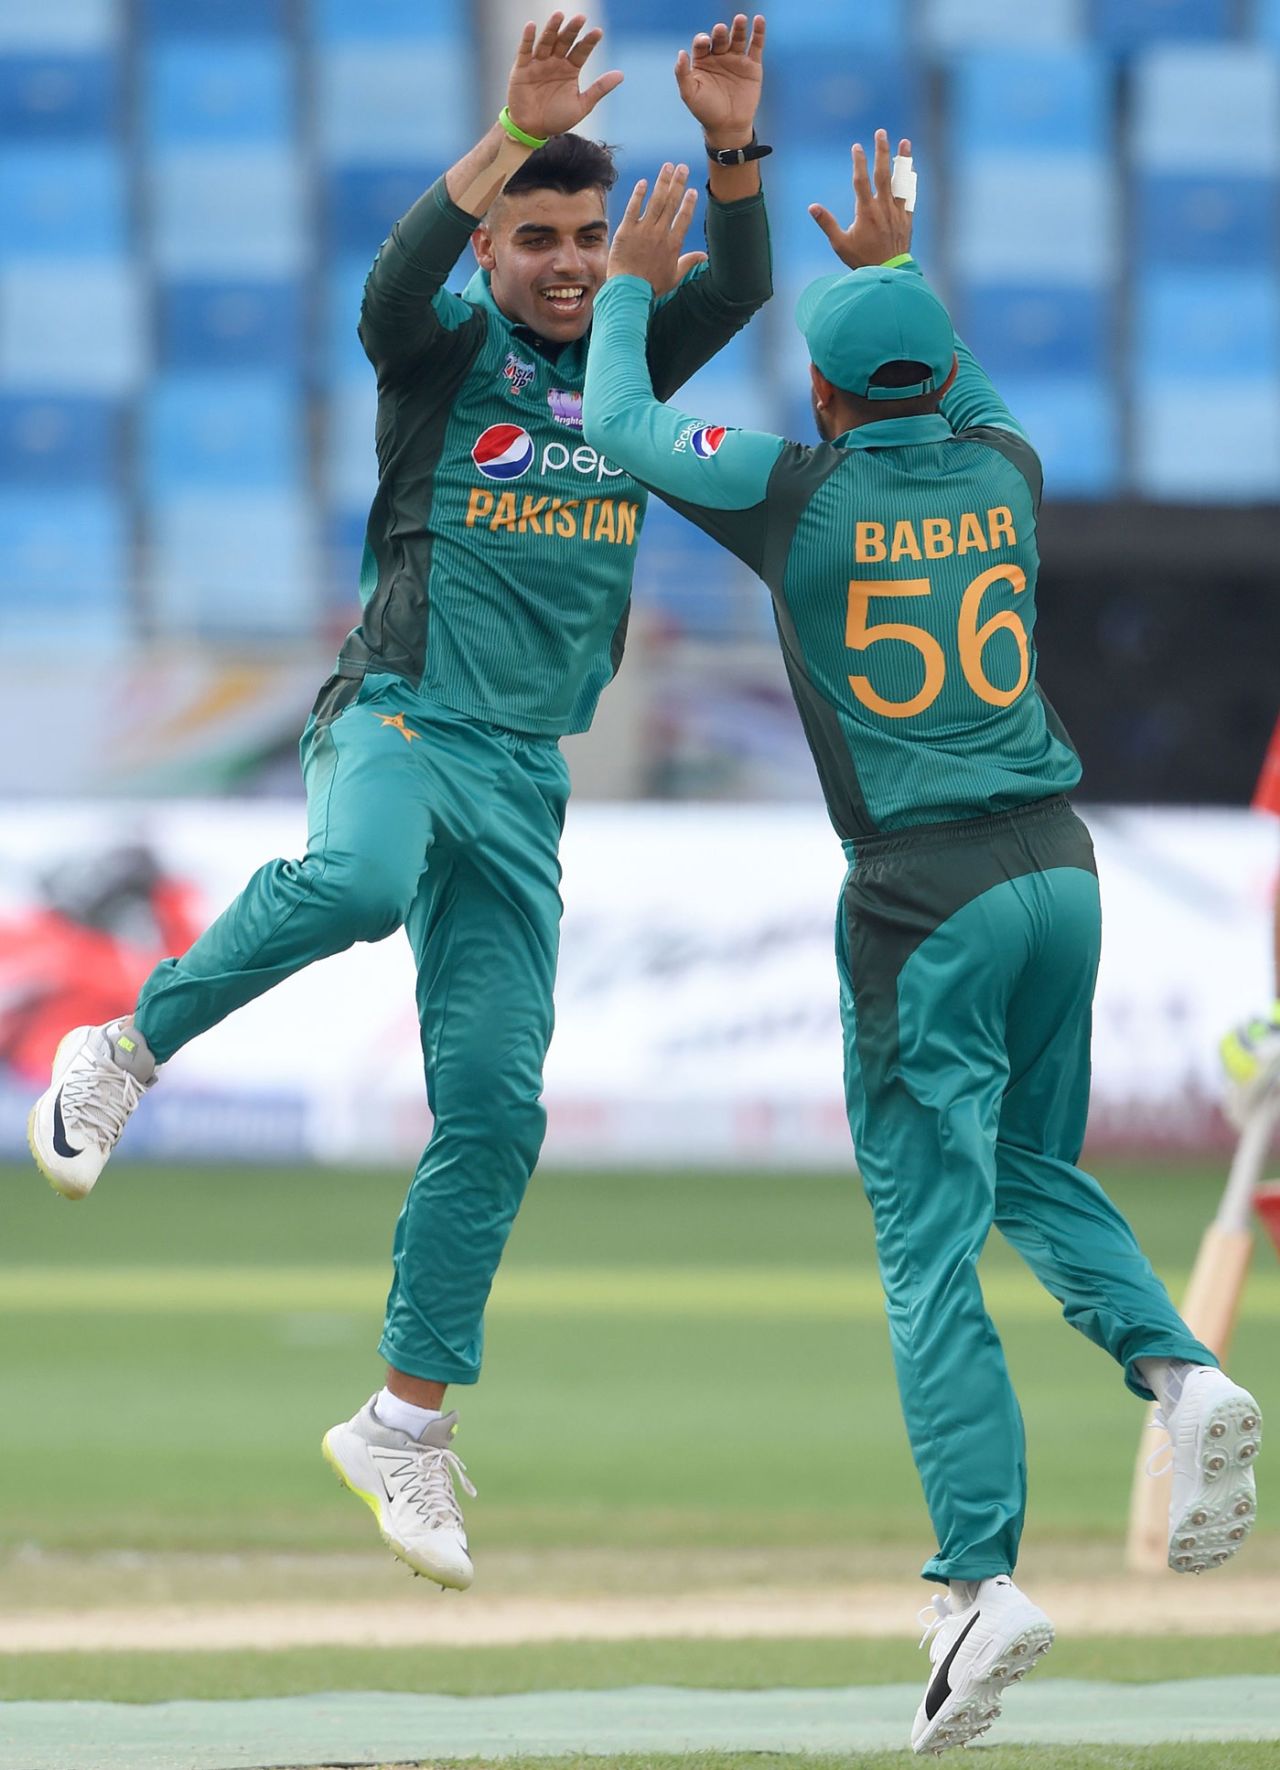 Shadab Khan leaps in celebration after picking up a wicket, Hong Kong v Pakistan, 2nd ODI, Asia Cup, September 16, 2018